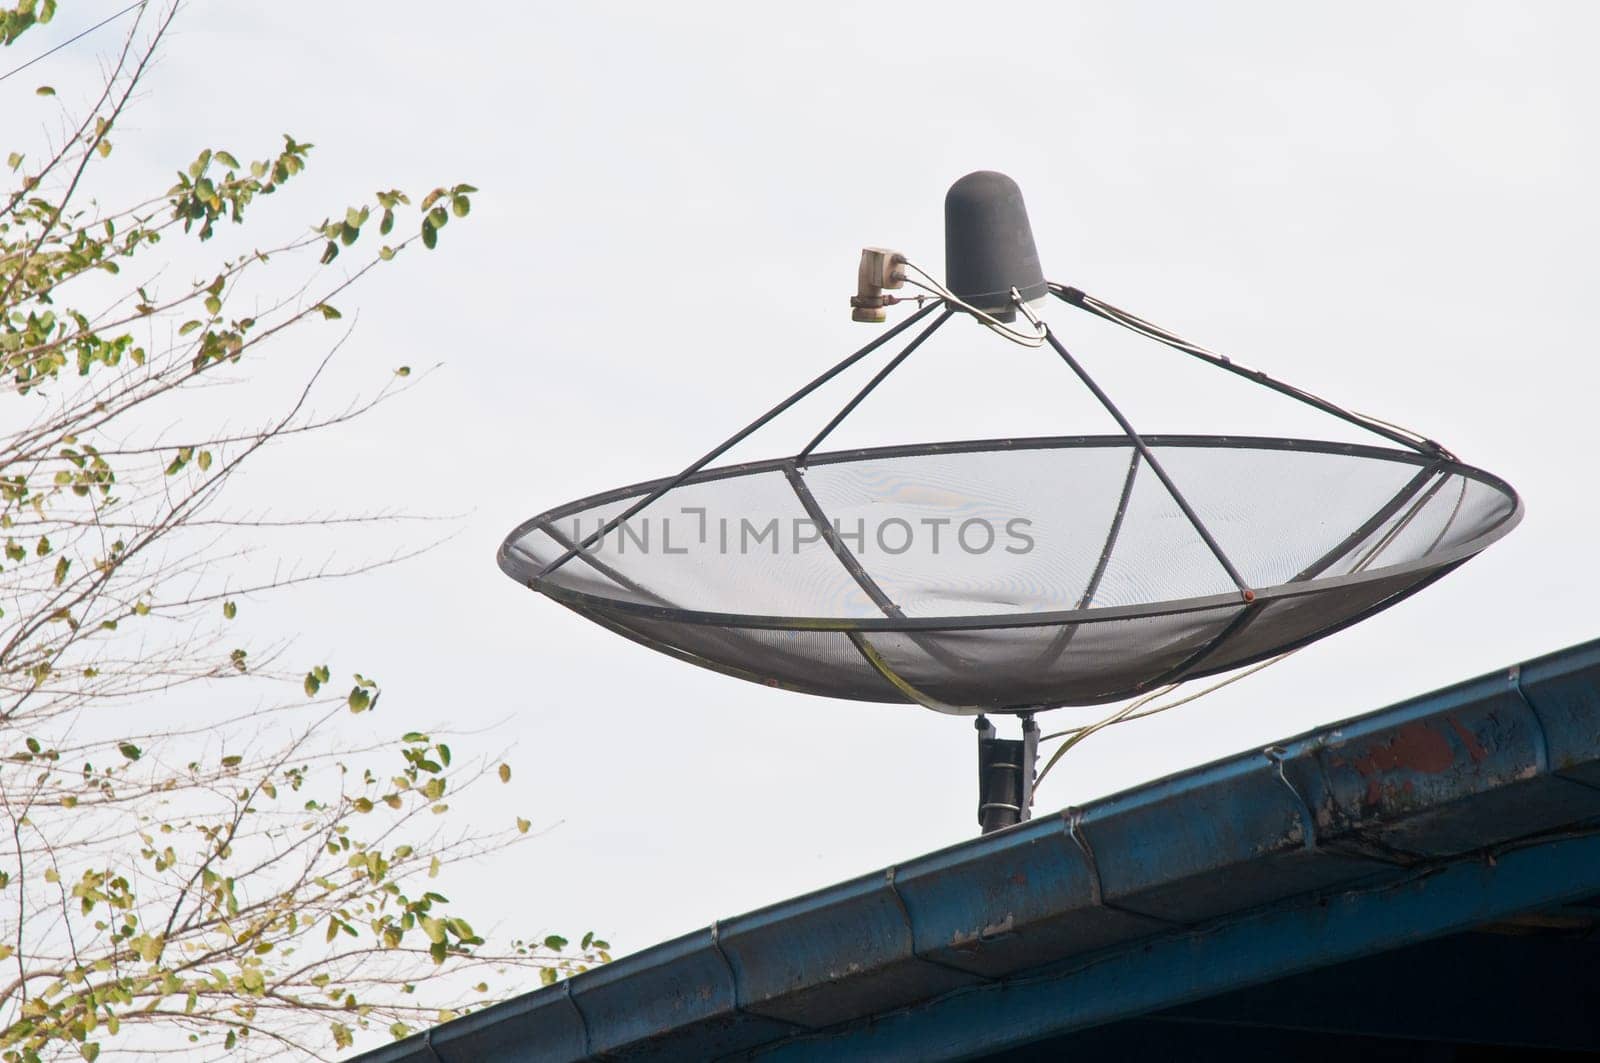 Modern satellite dish on the roof top with tree leaves branch by eyeofpaul